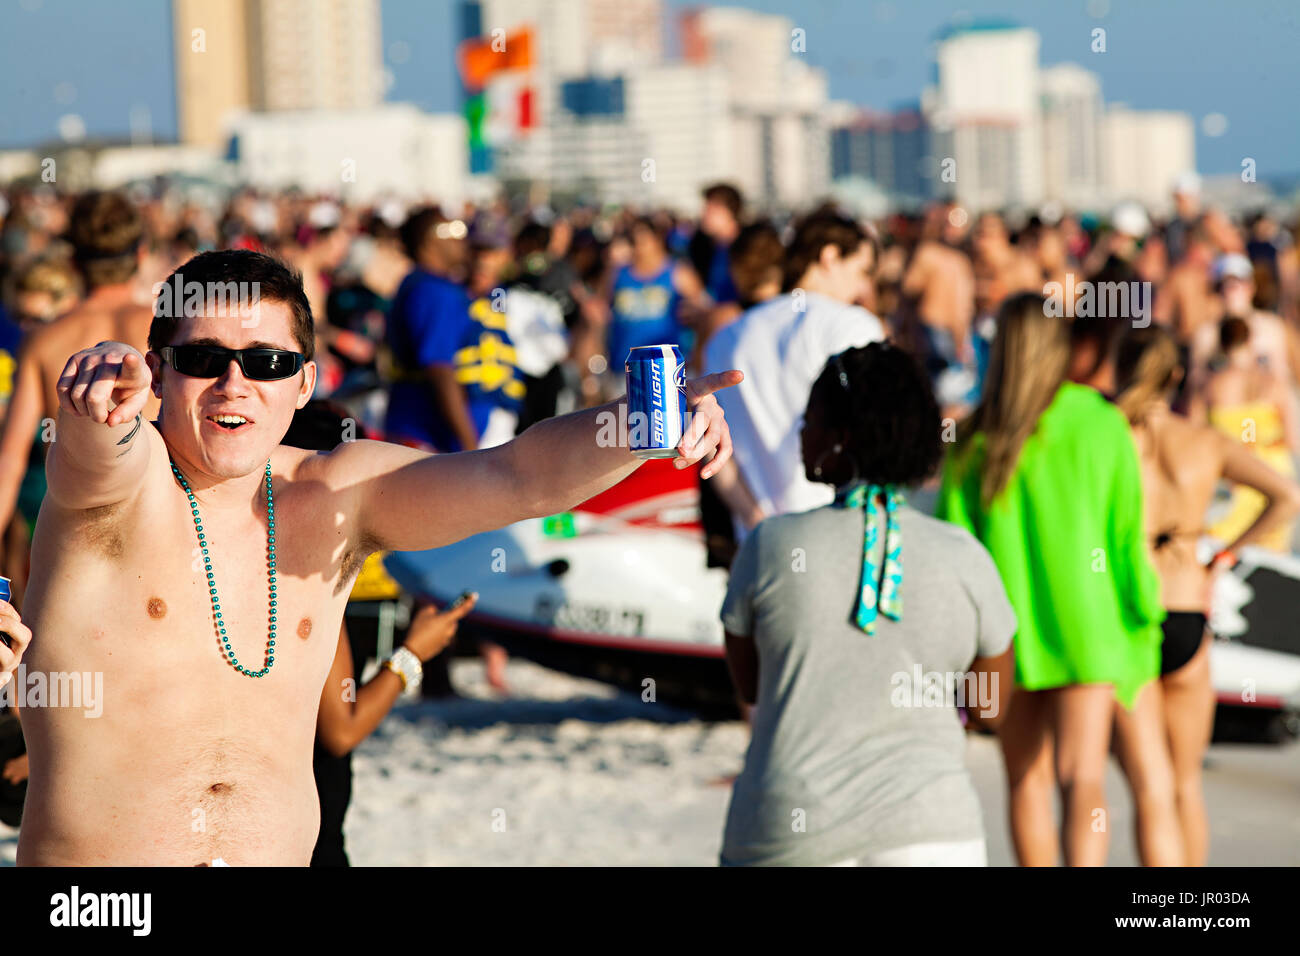 Young man showing his enthusiasm for spring break. Panama City Beach, Florida, 2011. Stock Photo